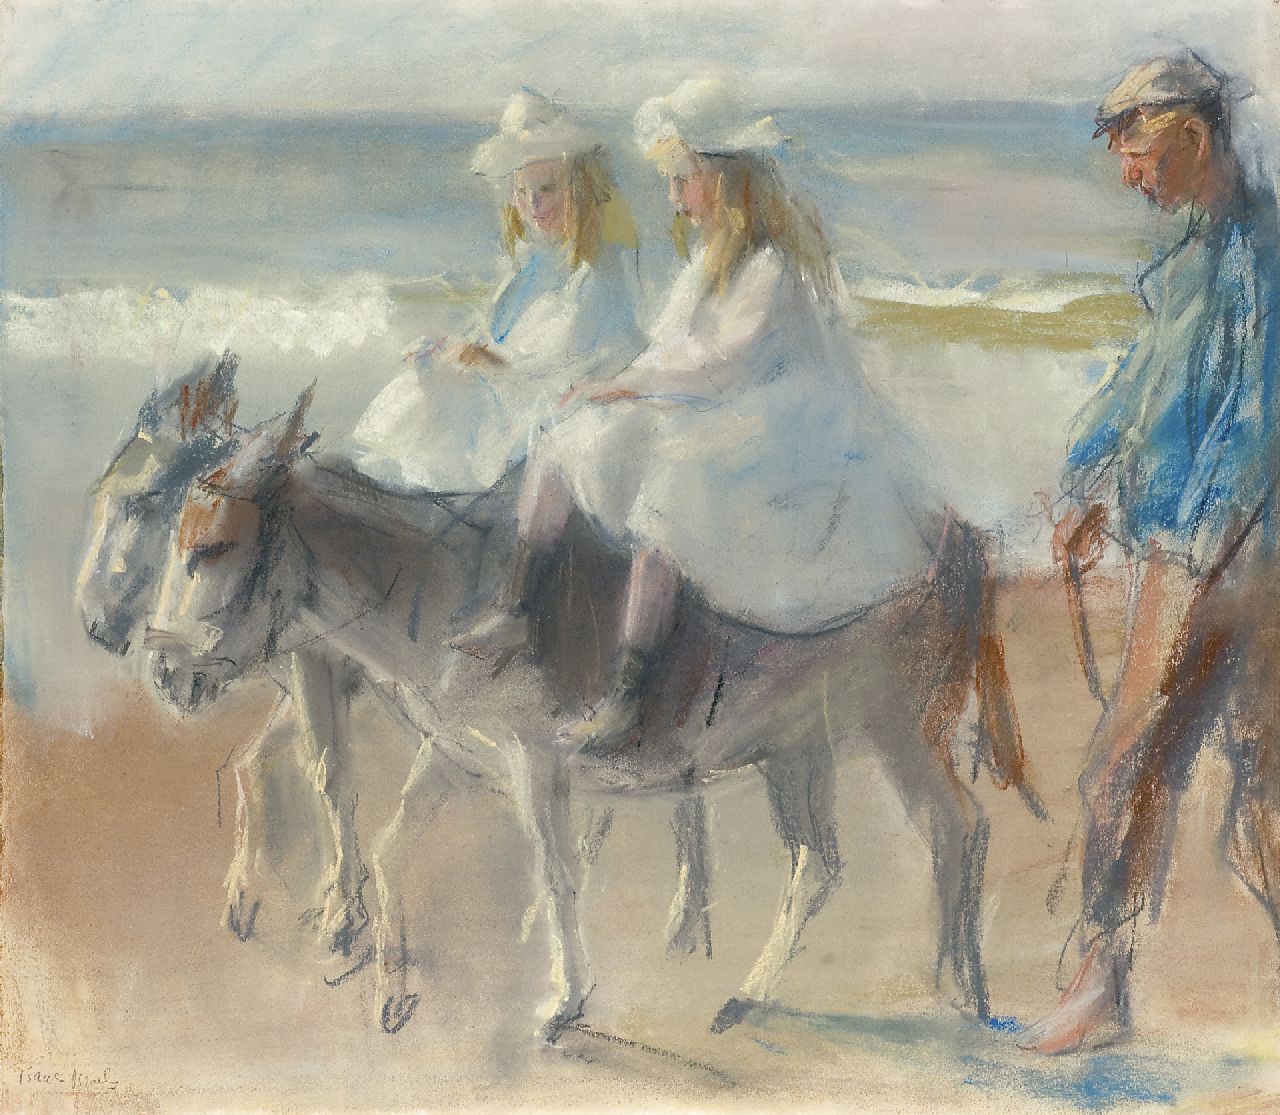 Israels I.L.  | 'Isaac' Lazarus Israels, A donkey-ride on the beach of Scheveningen, Pastell auf Papier 49,5 x 56,6 cm, signed l.l.